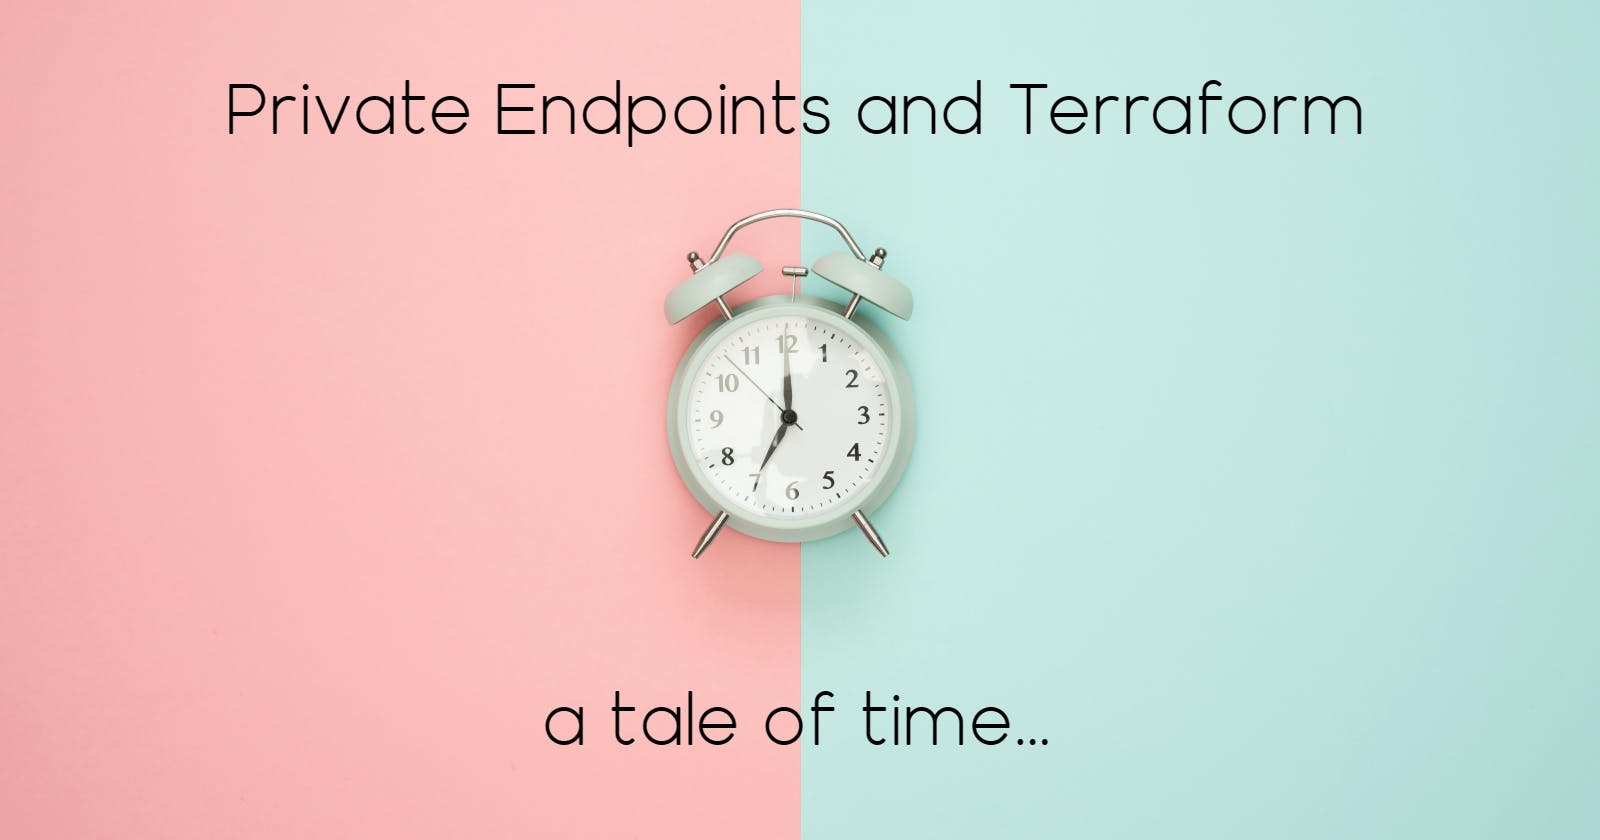 Private Endpoints and Terraform - A Tale of Time